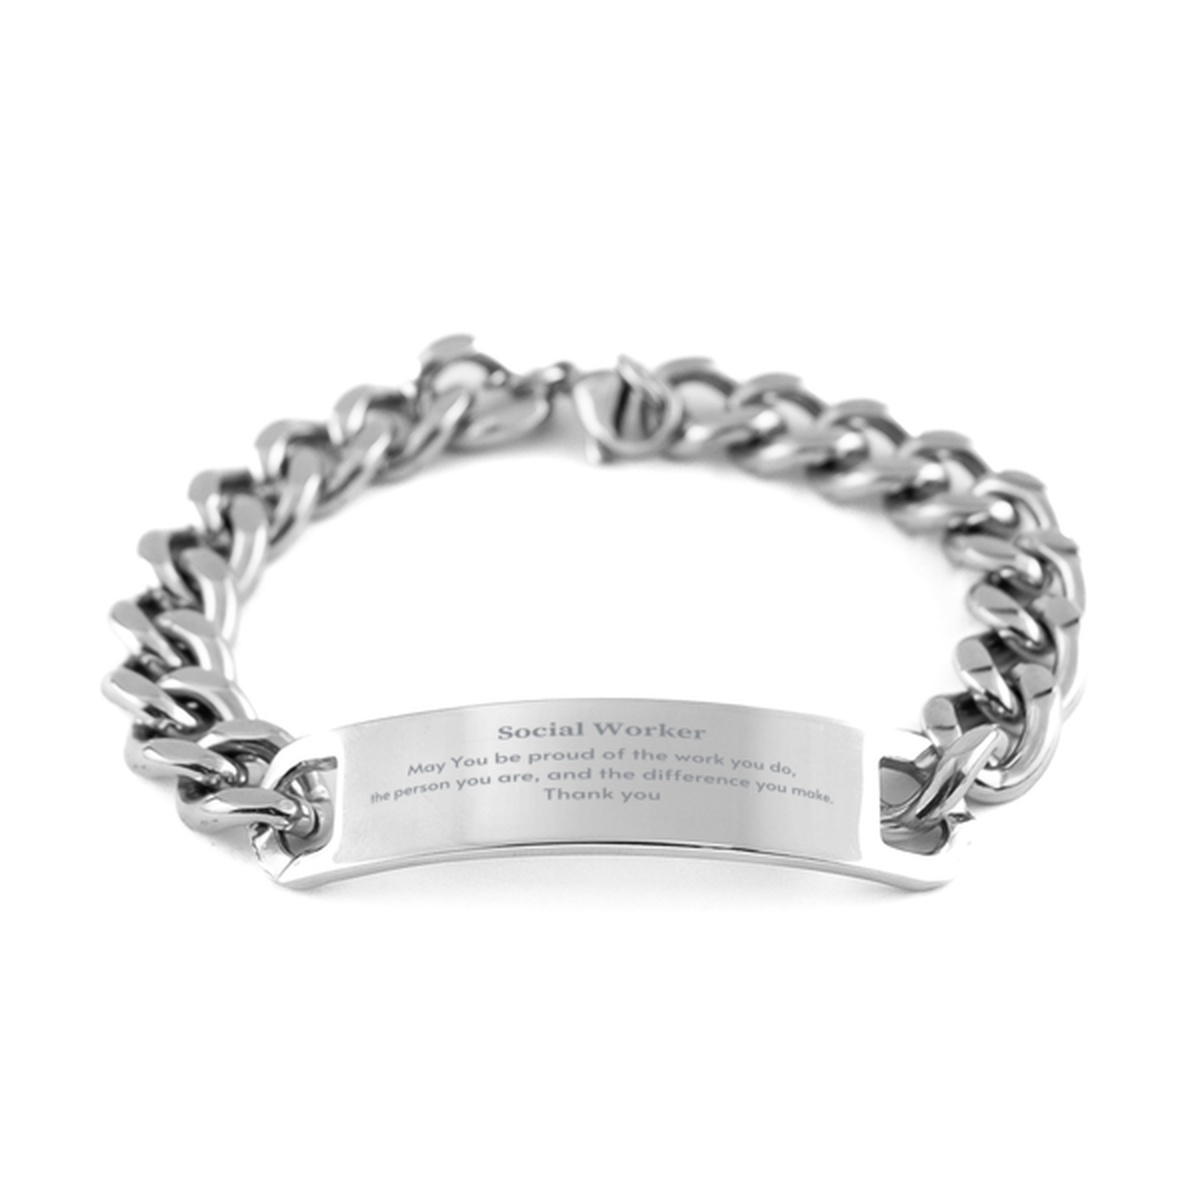 Heartwarming Cuban Chain Stainless Steel Bracelet Retirement Coworkers Gifts for Social Worker, Social Worker May You be proud of the work you do, the person you are Gifts for Boss Men Women Friends